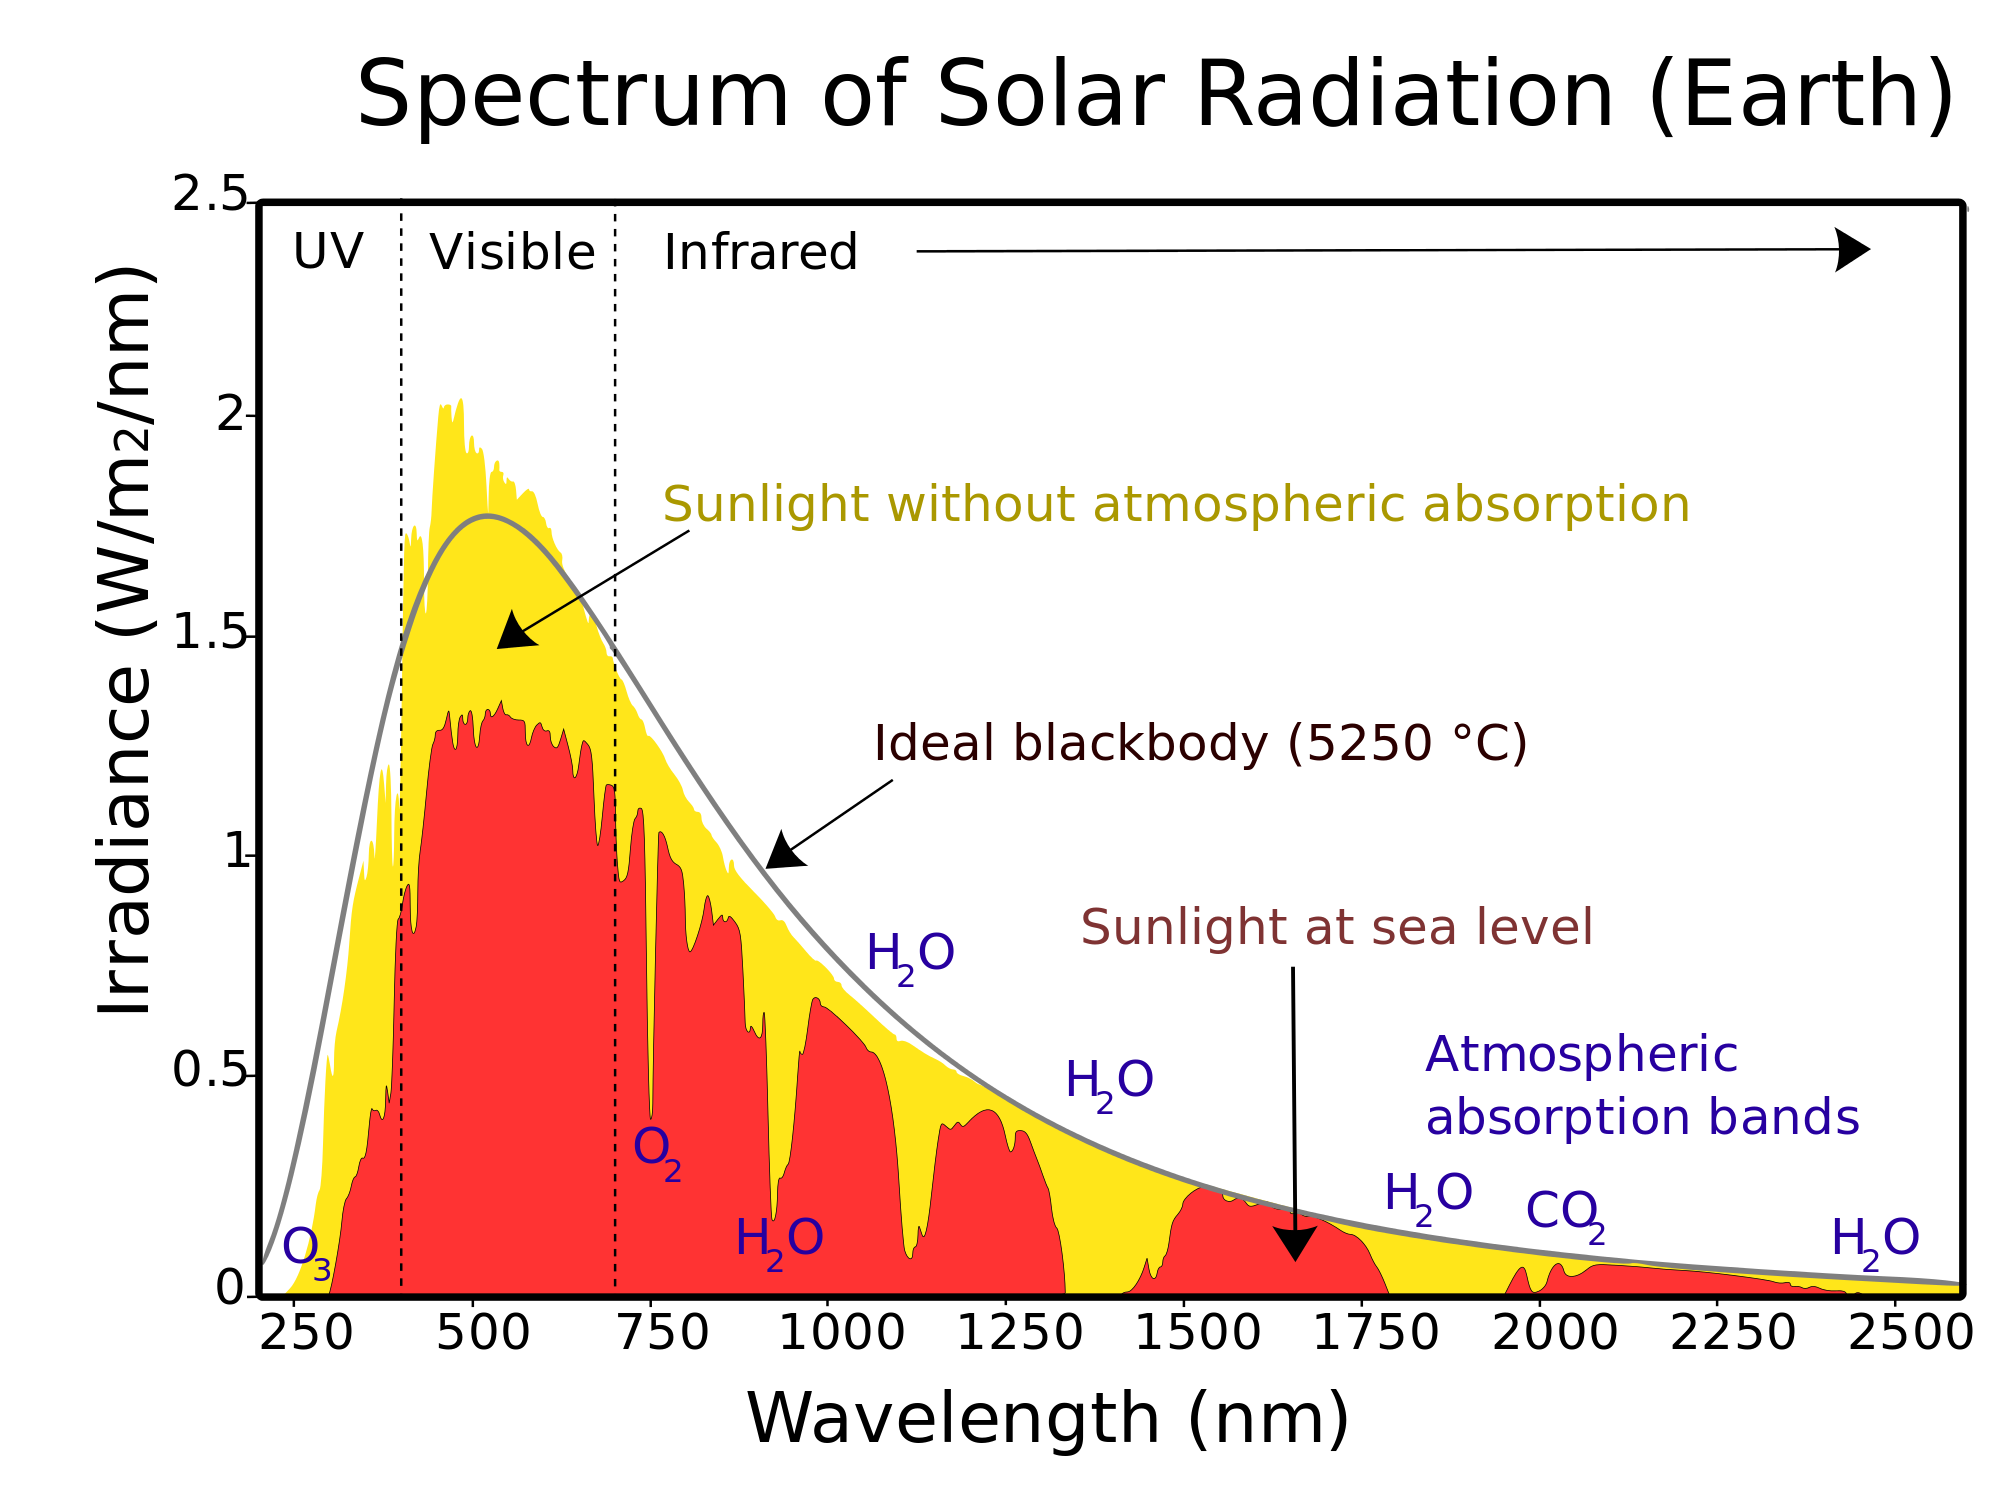 Left: Planck's law at various temperatures - Right: Energy spectrum of the atmosphere: Left: Planck's law at various temperatures - Right: Energy spectrum of the atmosphere